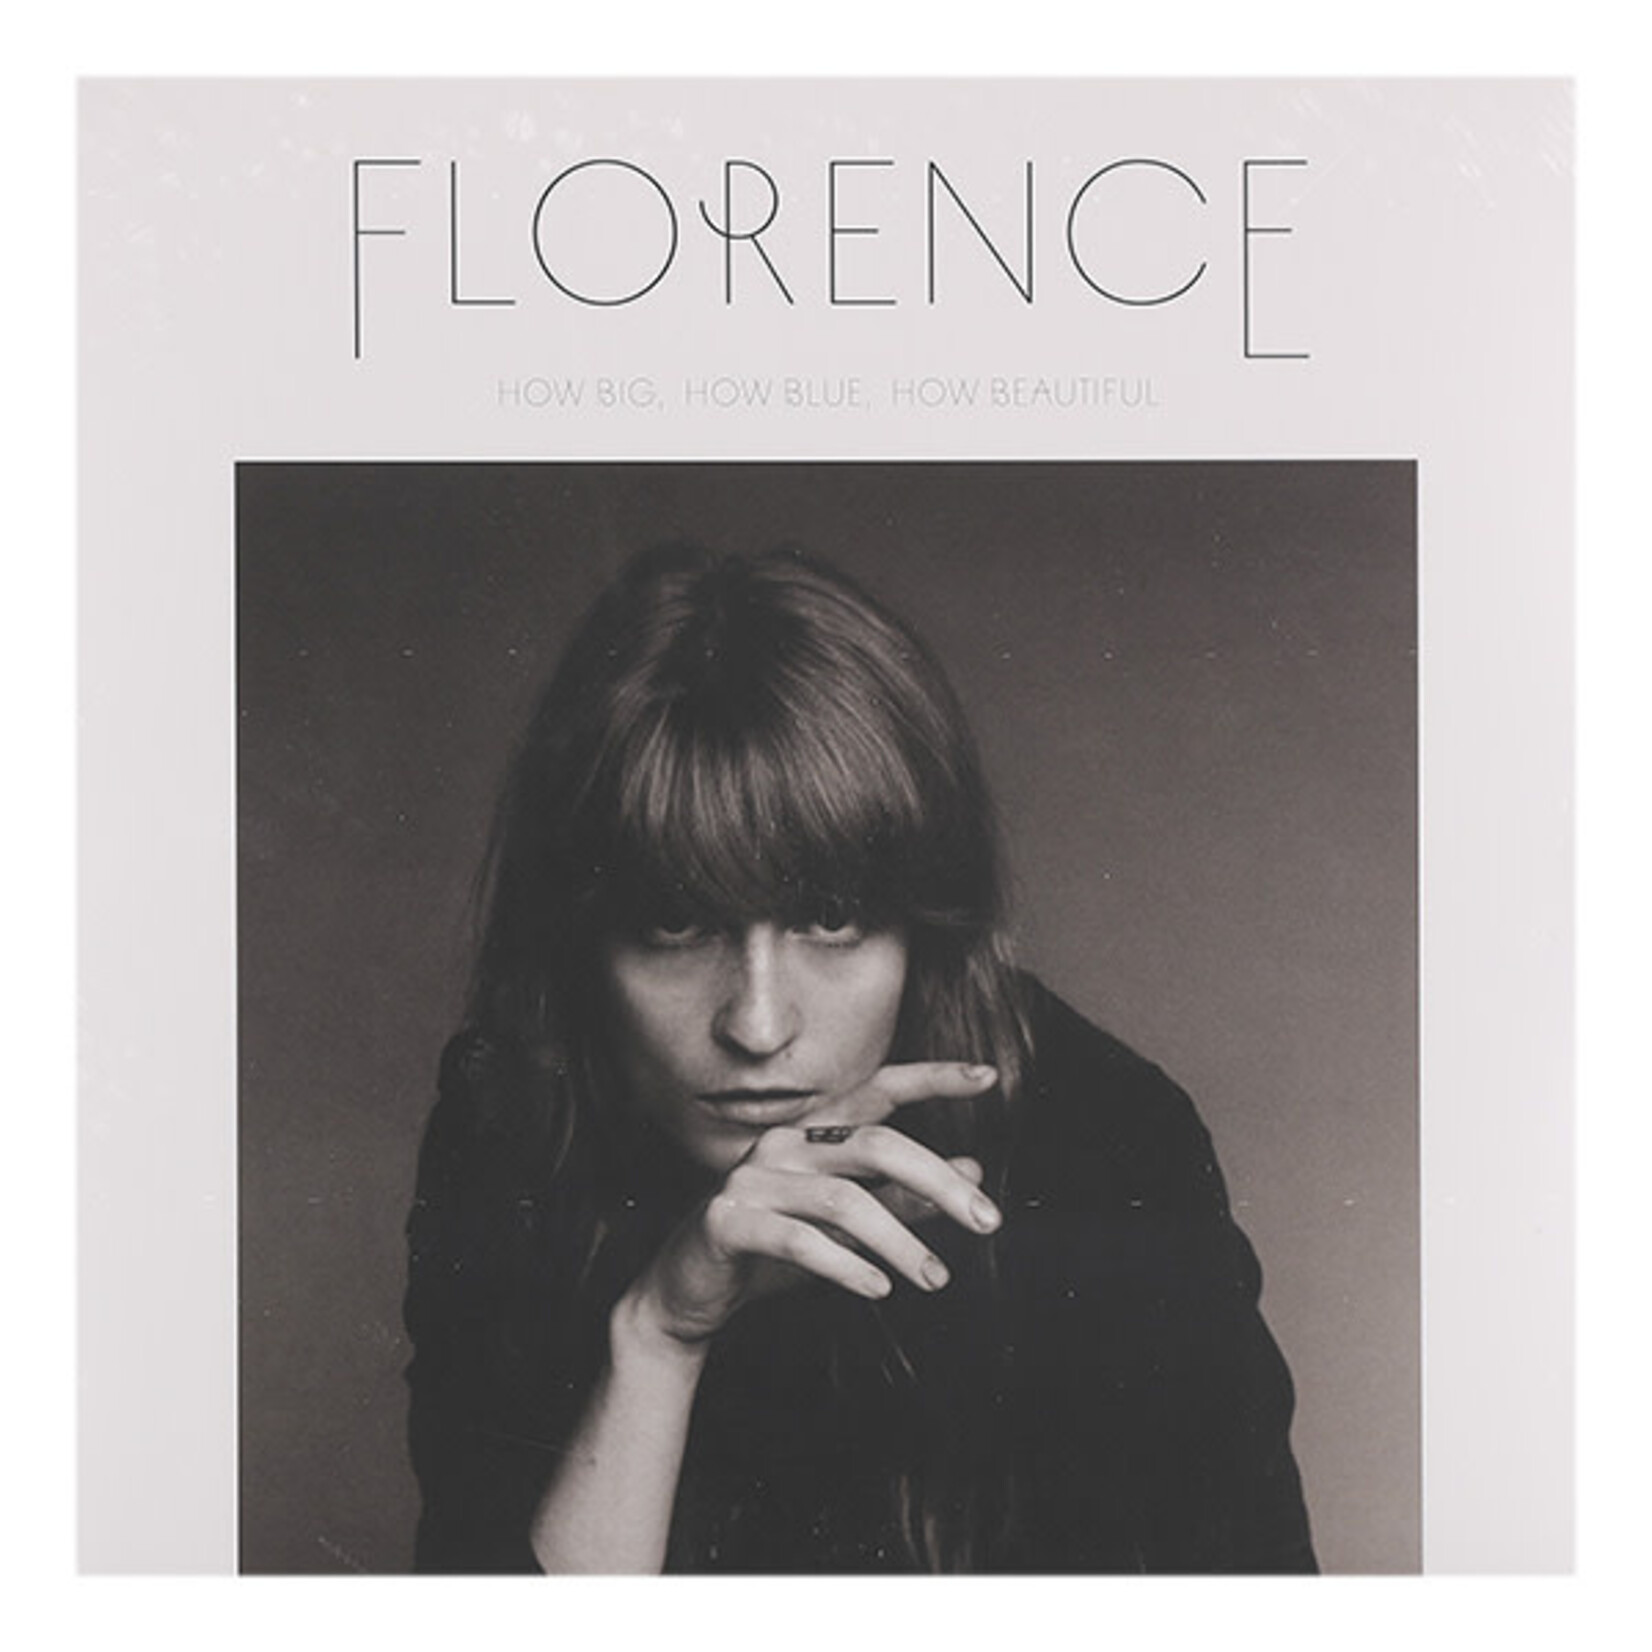 FLORENCE & THE MACHINE - HOW BIG HOW BLUE HOW BEAUTIFUL - 2LP